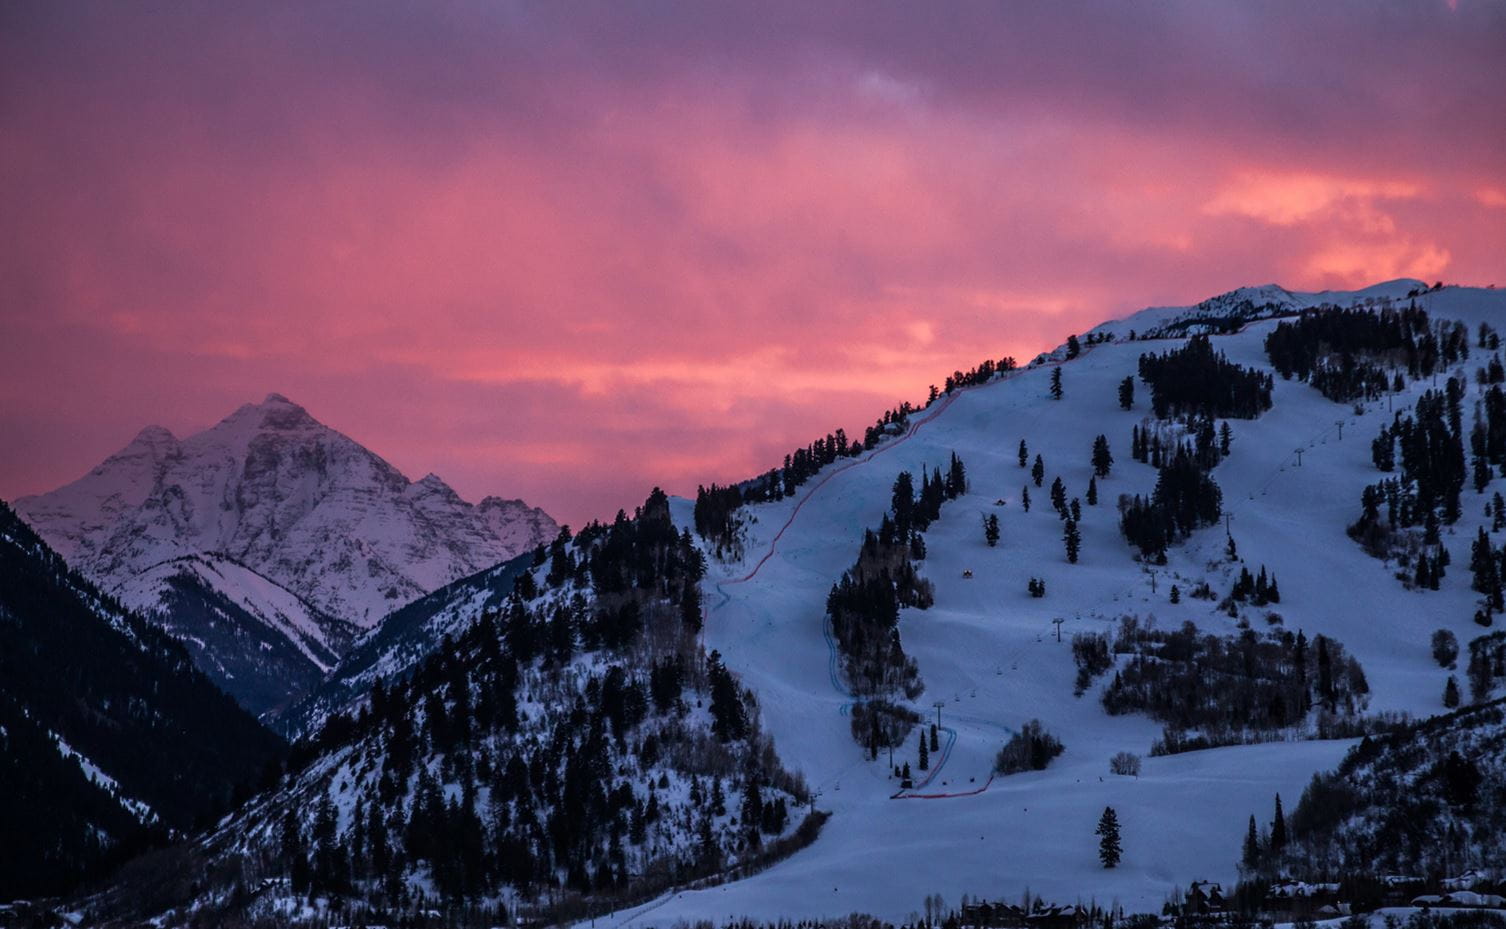 A pink sunset over Buttermilk and Pyramid Peak